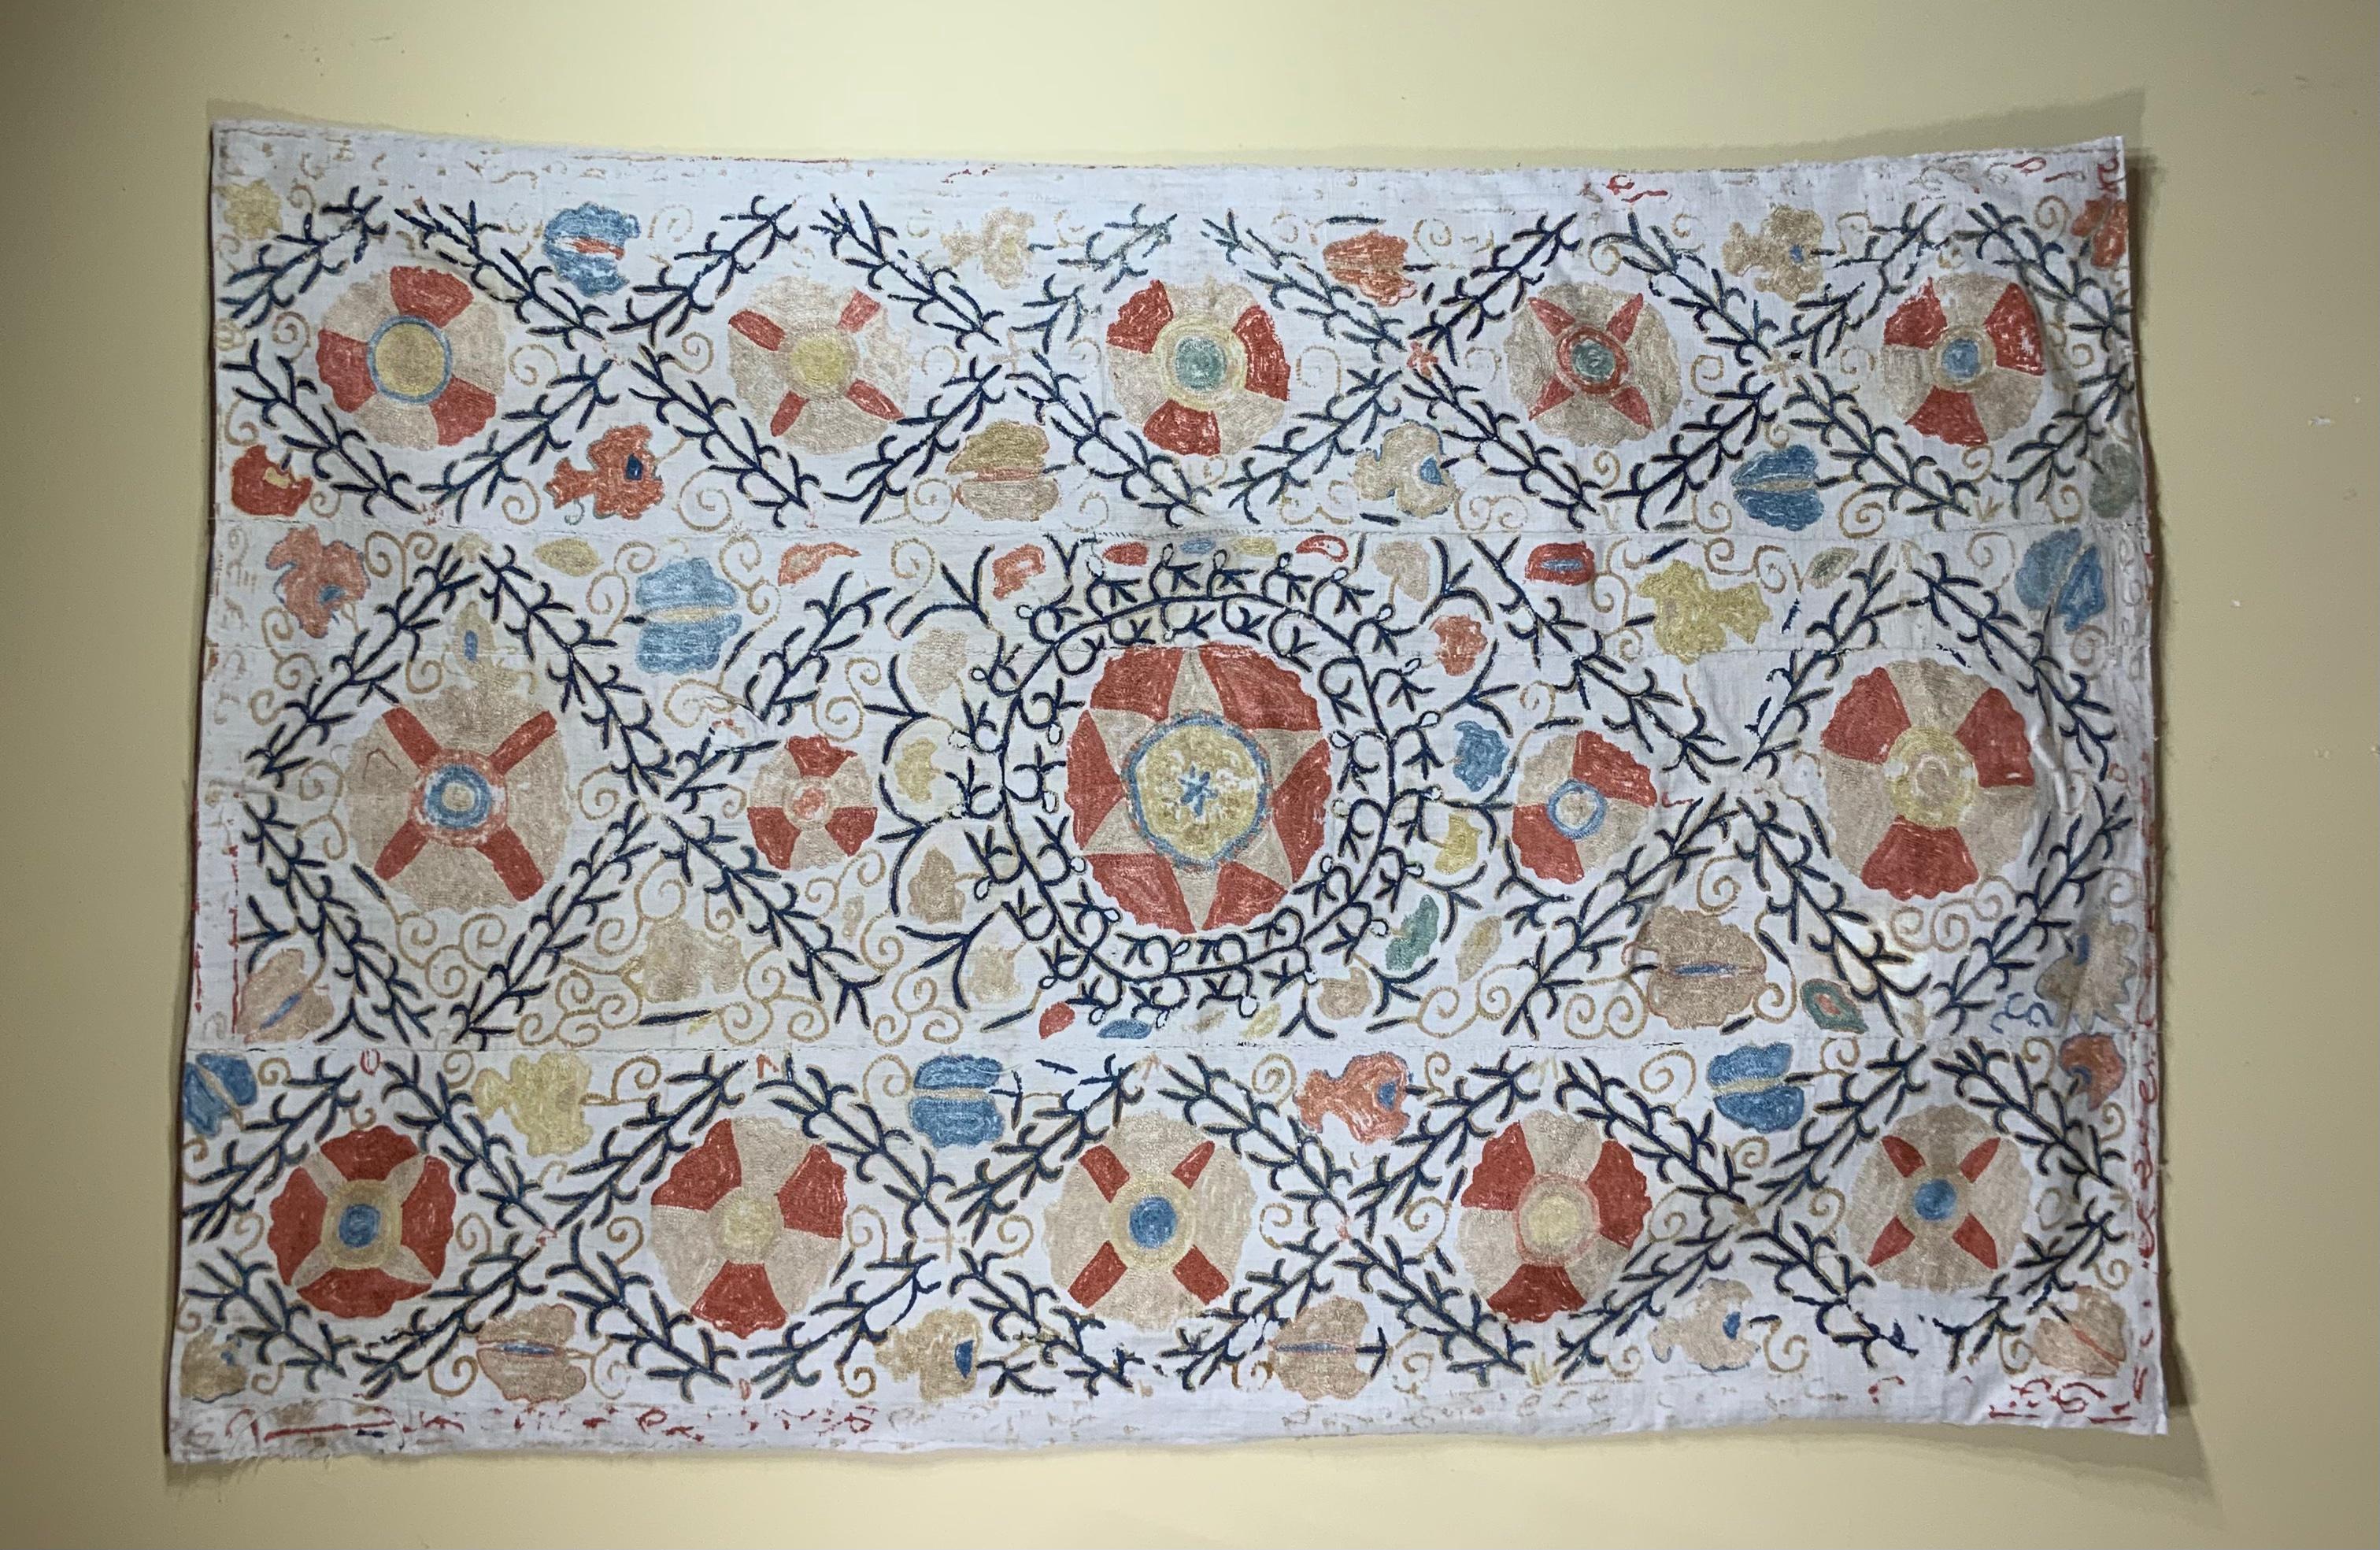 Antique Suzani textile made of hand silk embroidery, intricate scrolling vines and flowers motifs on a handwoven cotton background. Professionally cleaned and restored , backed with fine cotton textile.
Could use as wall hanging or on top of table